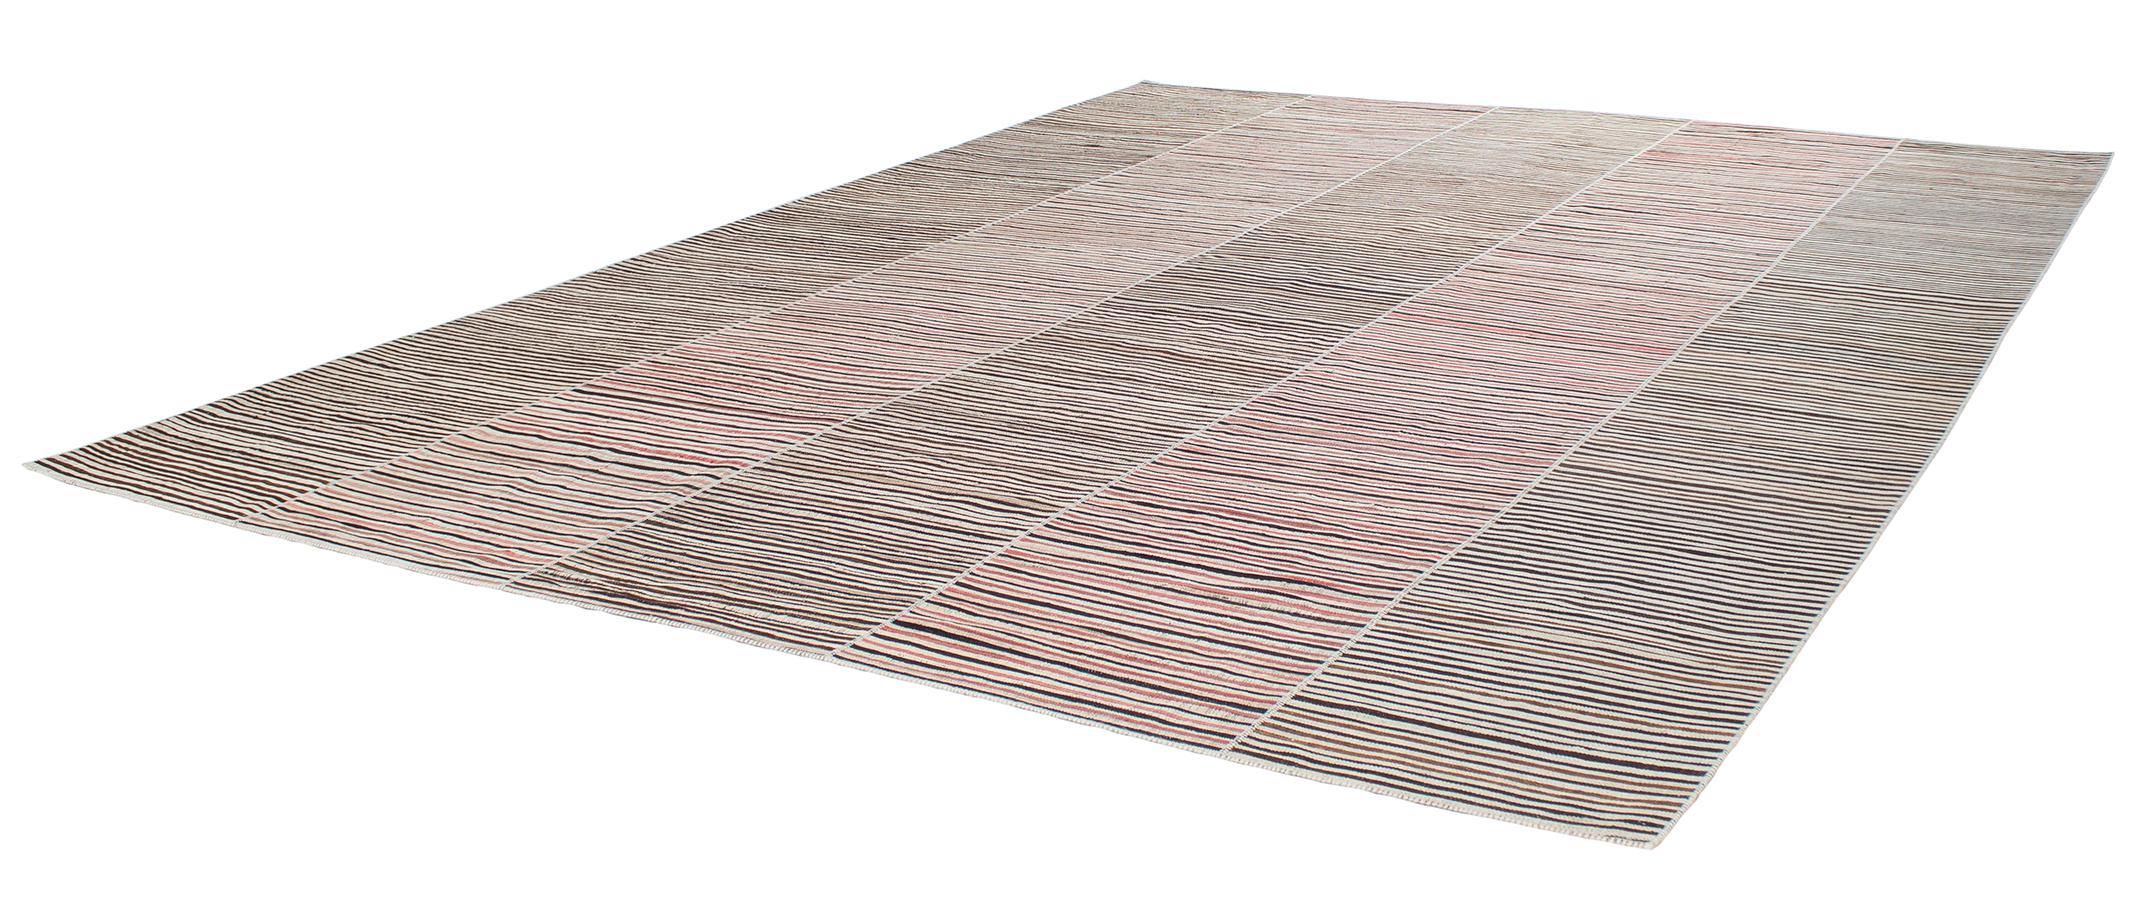 Hand-Woven Vintage Persian Mazandaran Handwoven Flat-Weave Rug in Brown and Red Stripes For Sale